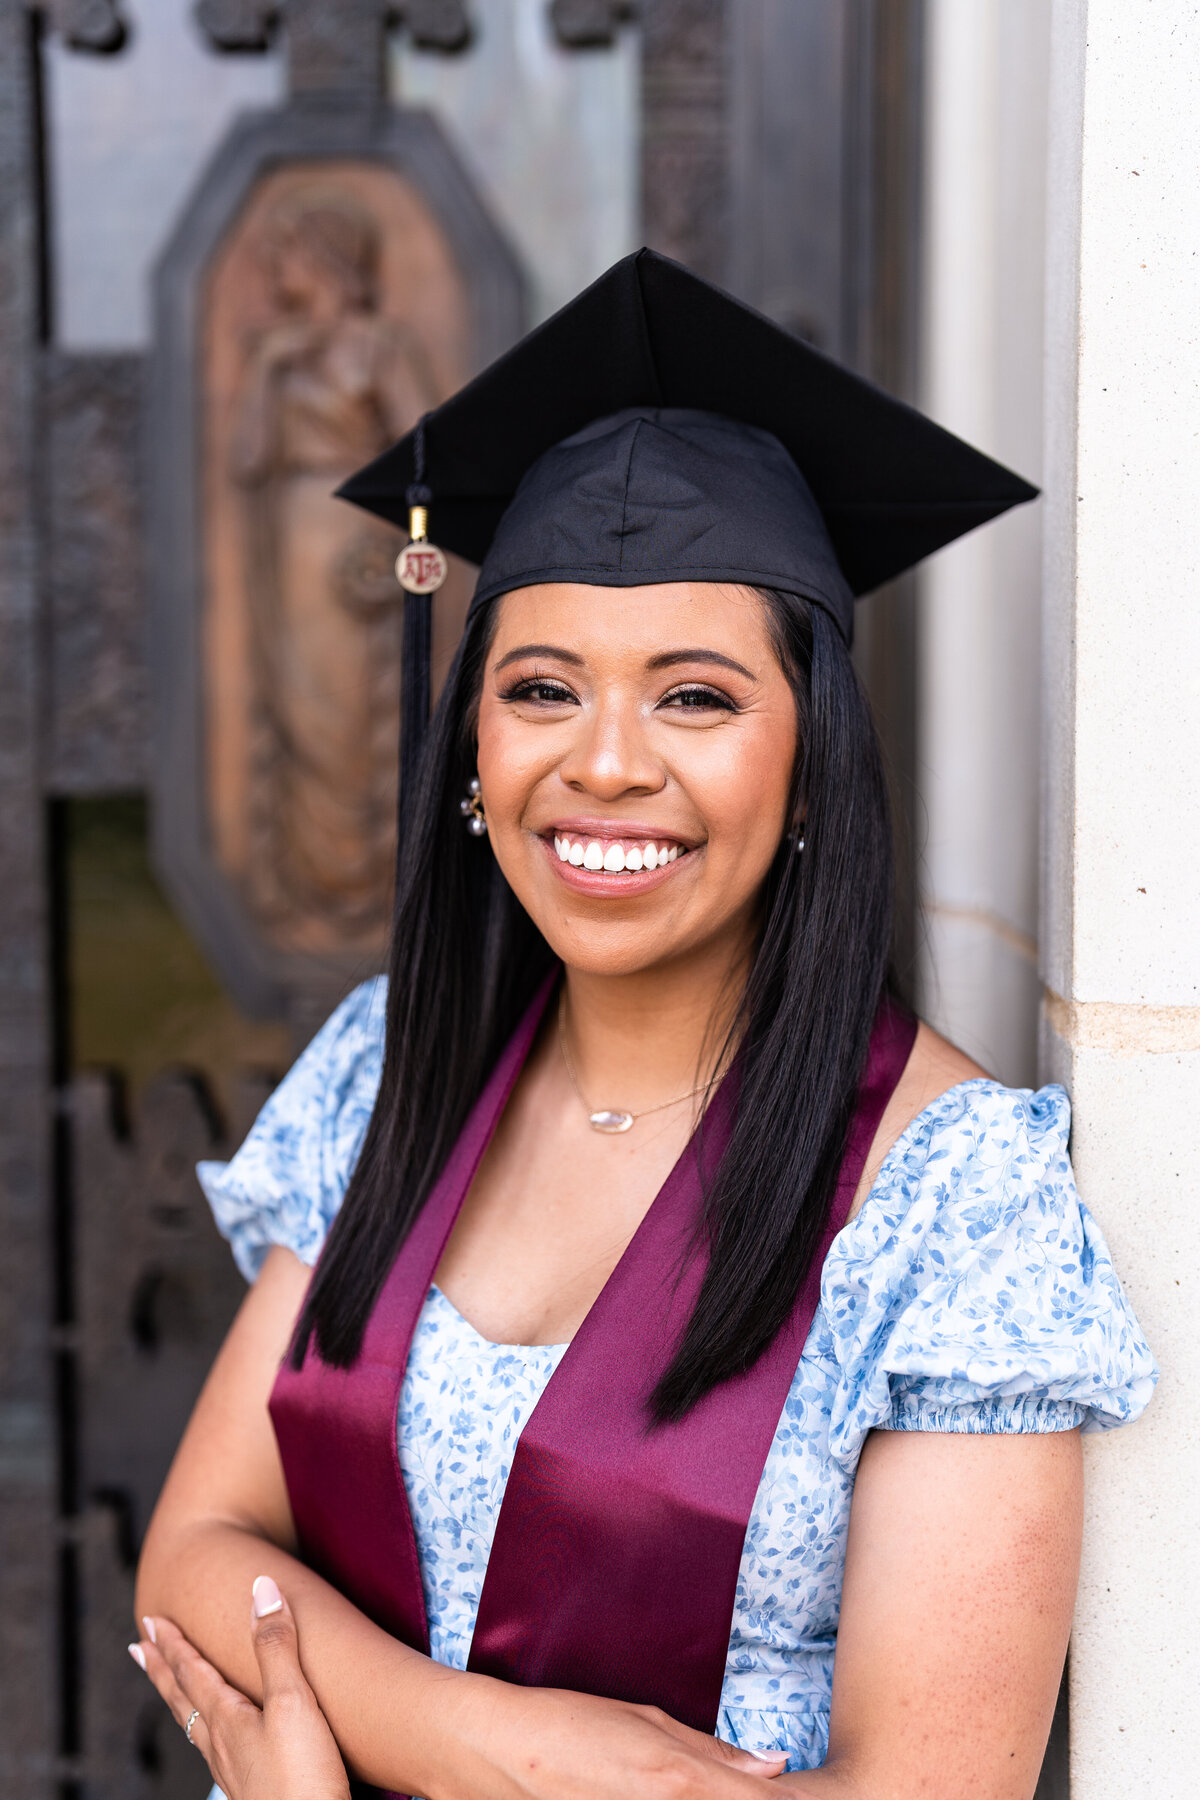 Texas A&M senior girl crossing arms and smiling while wearing blue dress, maroon stole and grad cap while leaning on door of Administration Building